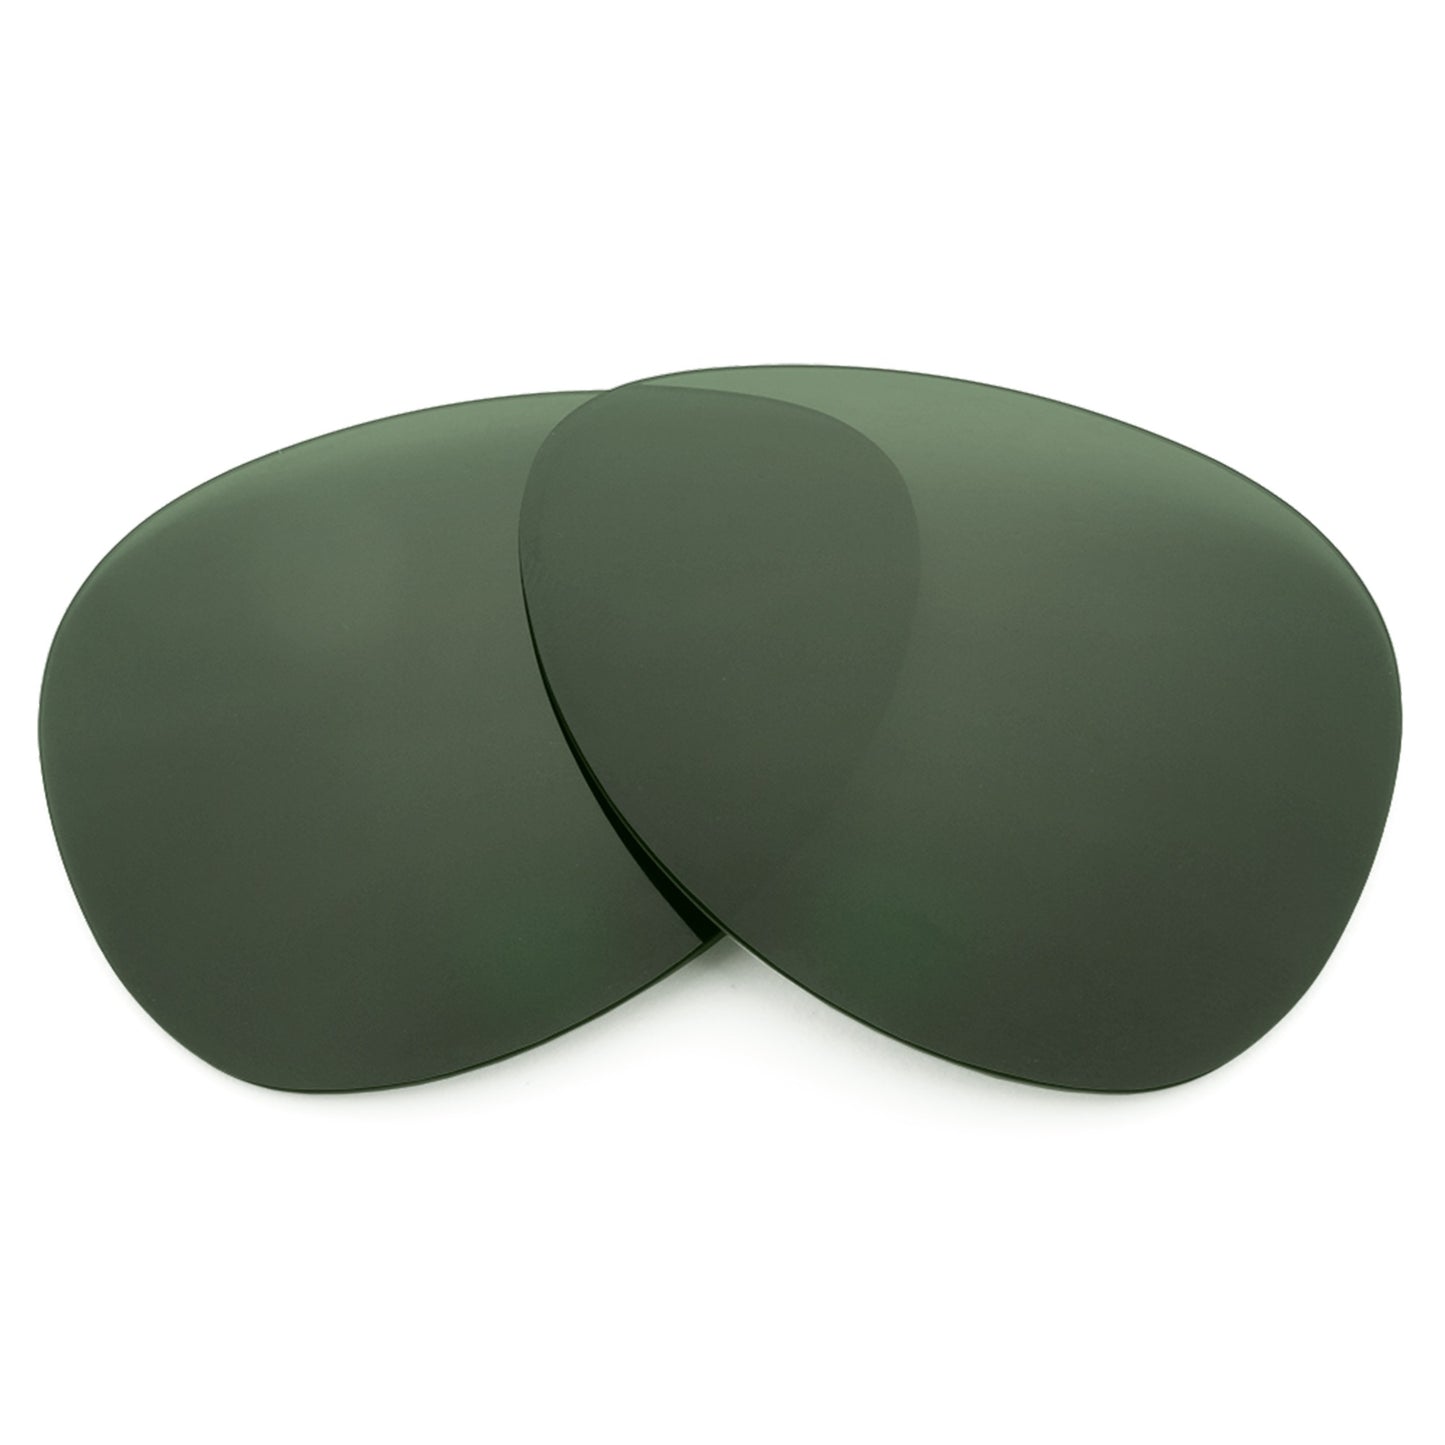 Revant replacement lenses for Ray-Ban Cockpit RB3362 59mm Non-Polarized Gray Green